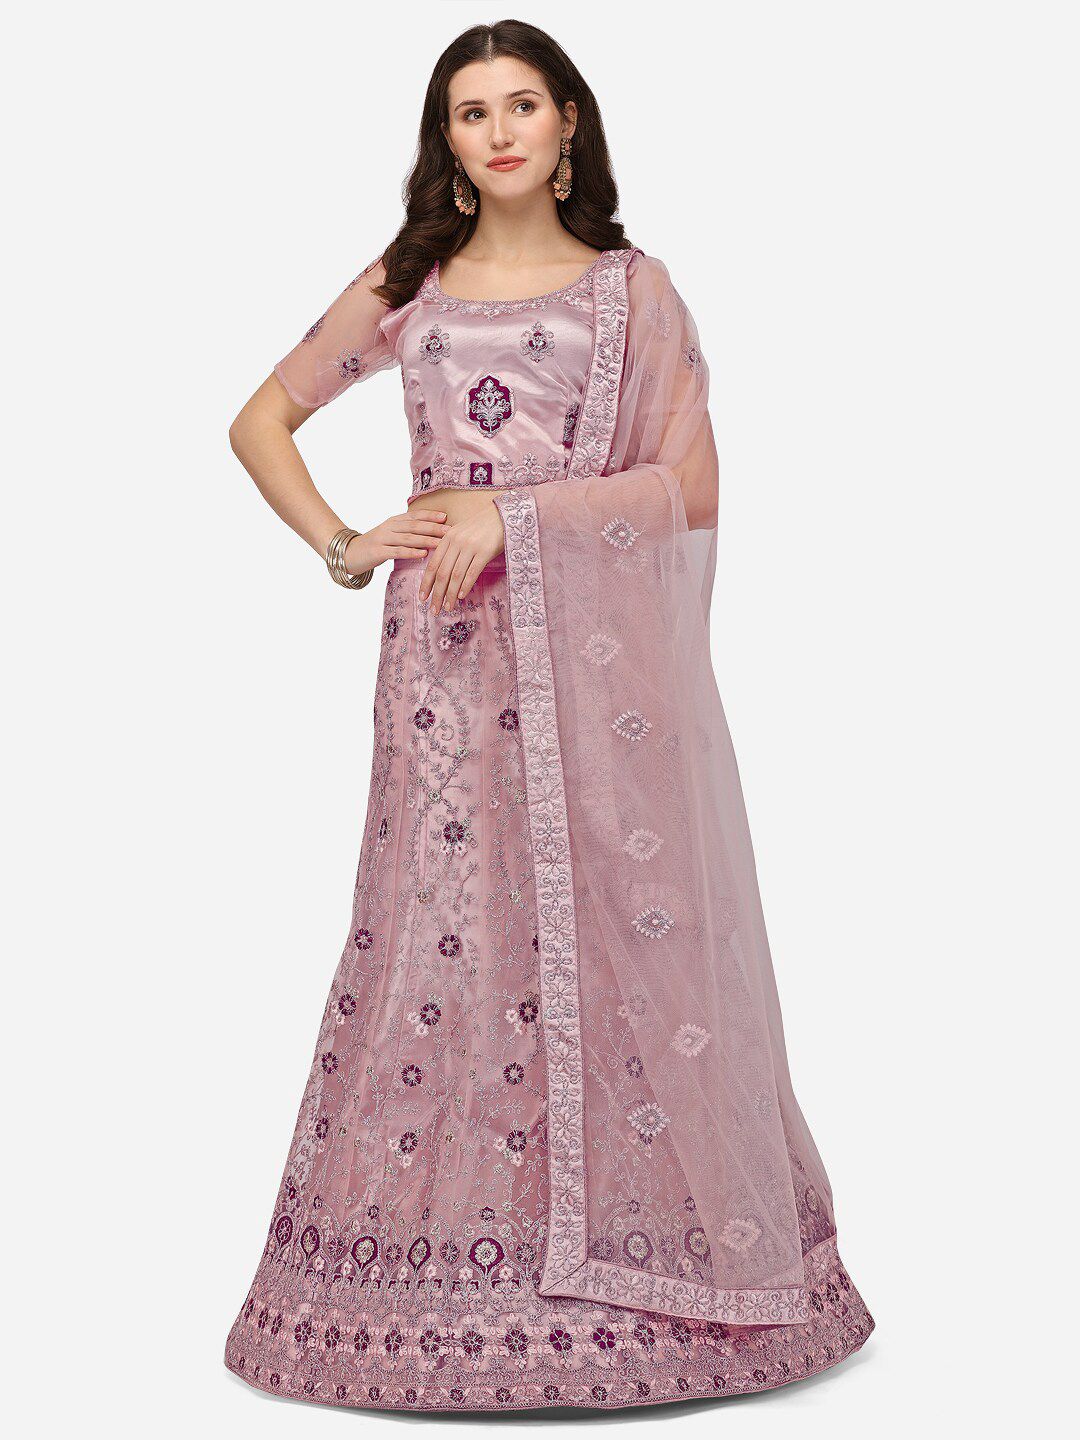 VRSALES Lavender Embroidered Semi-Stitched Lehenga & Unstitched Blouse With Dupatta Price in India